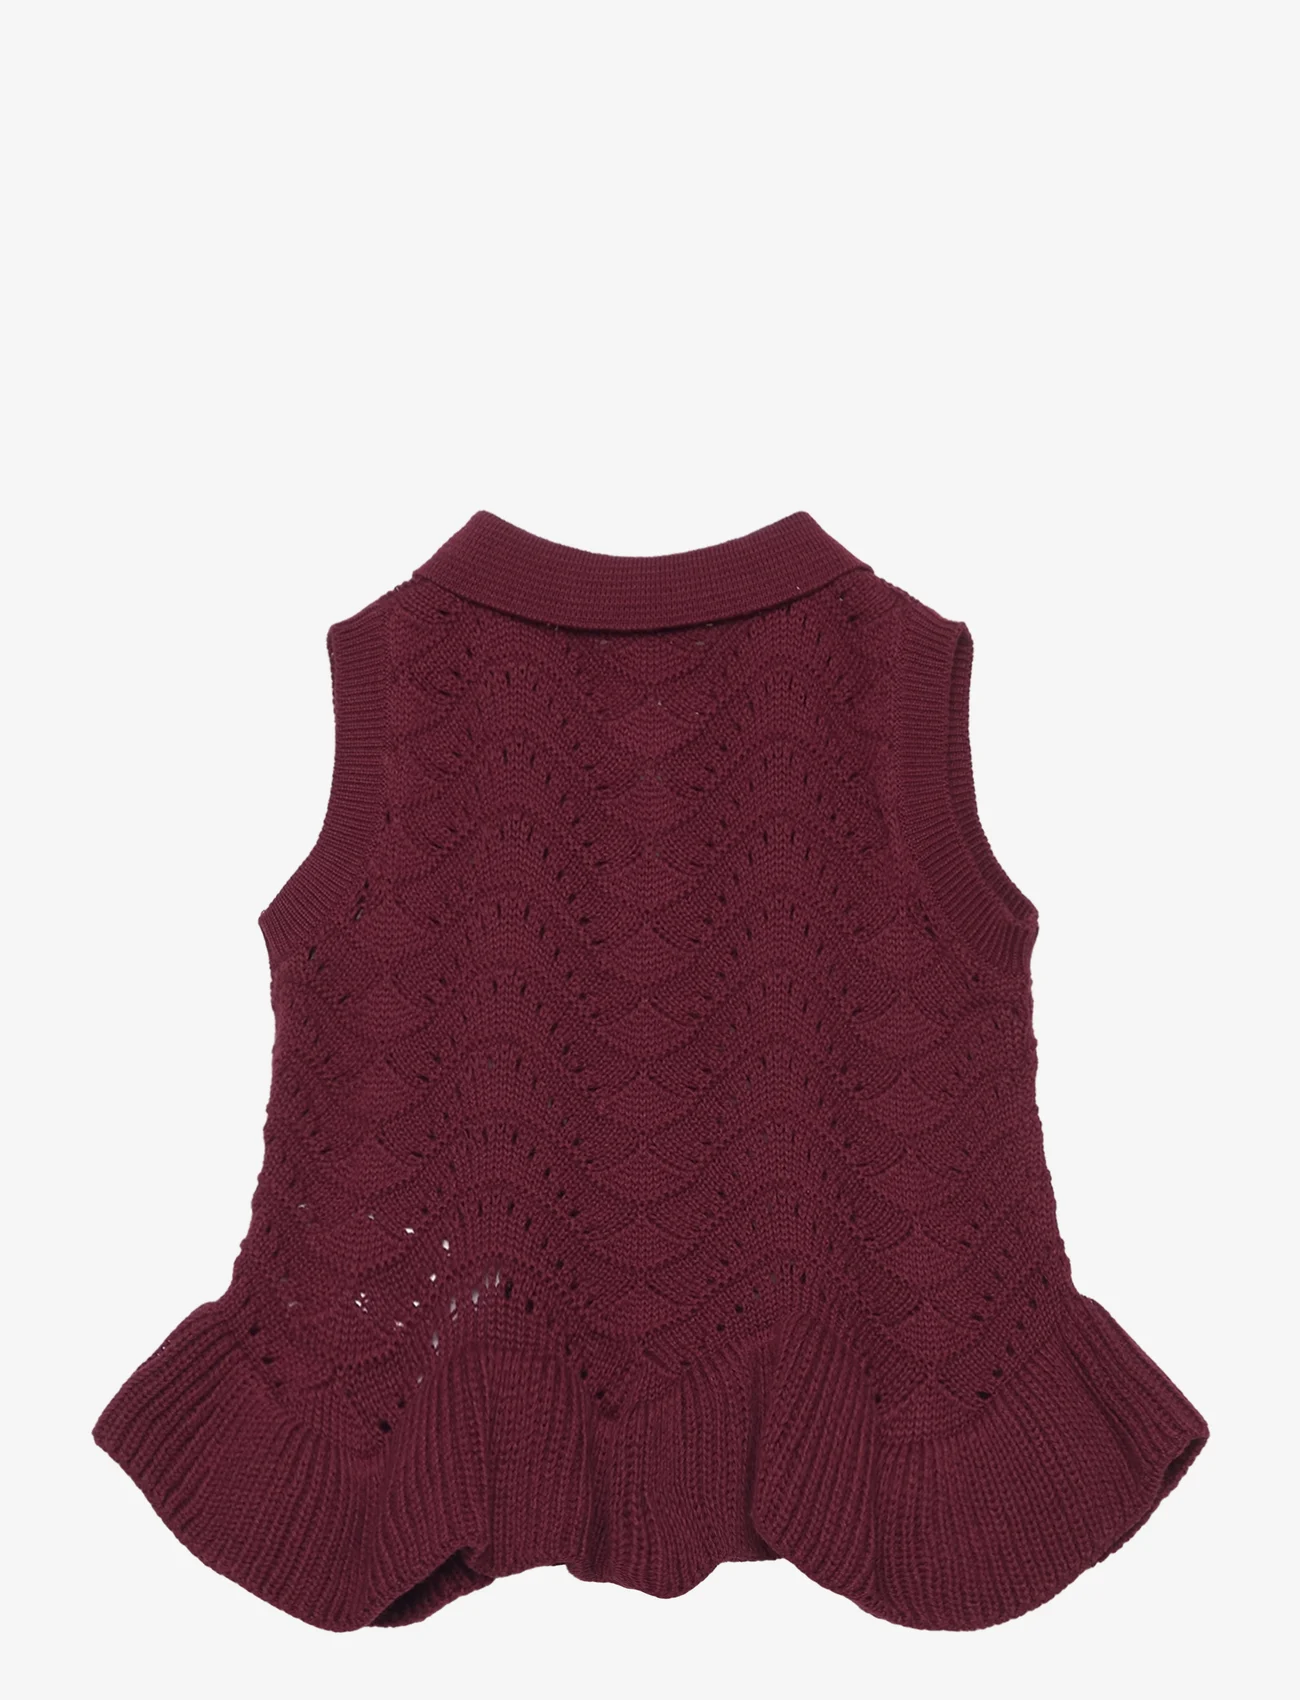 Müsli by Green Cotton - Knit needle out vest baby - alhaisimmat hinnat - fig - 1